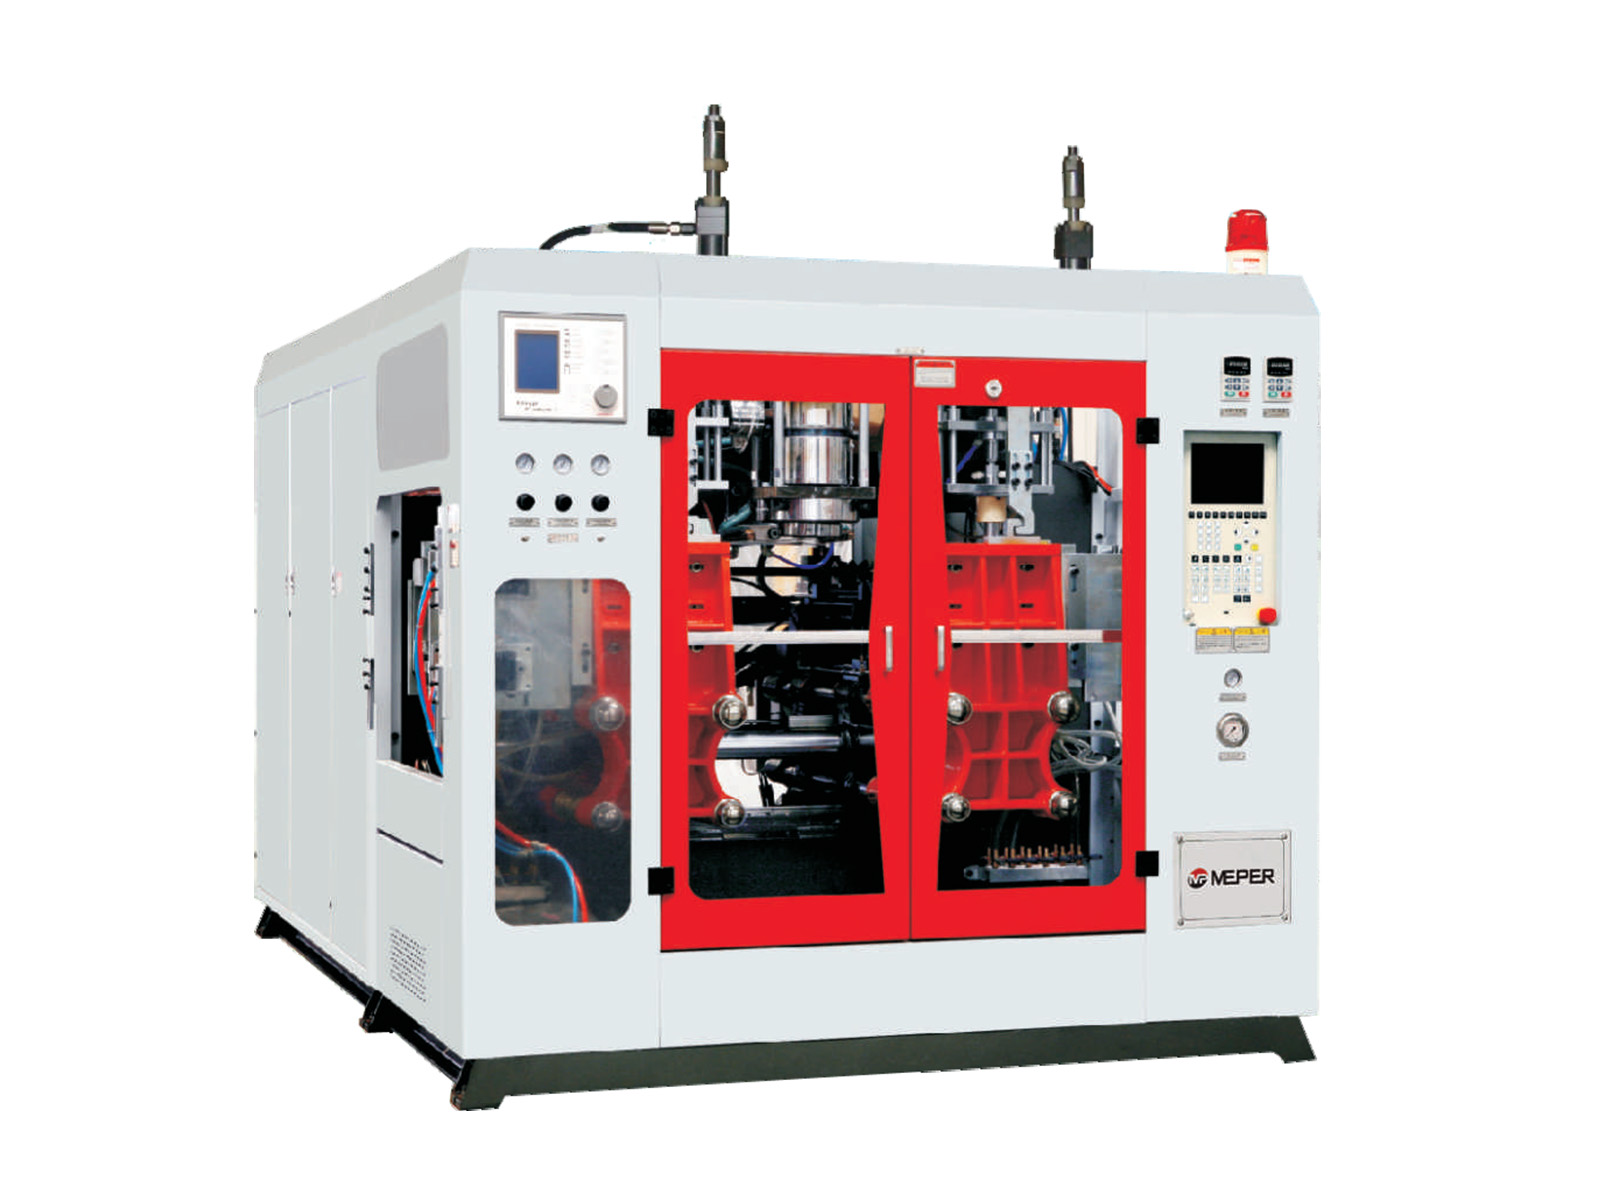 Matters needing attention in the blow molding process of Meper machine